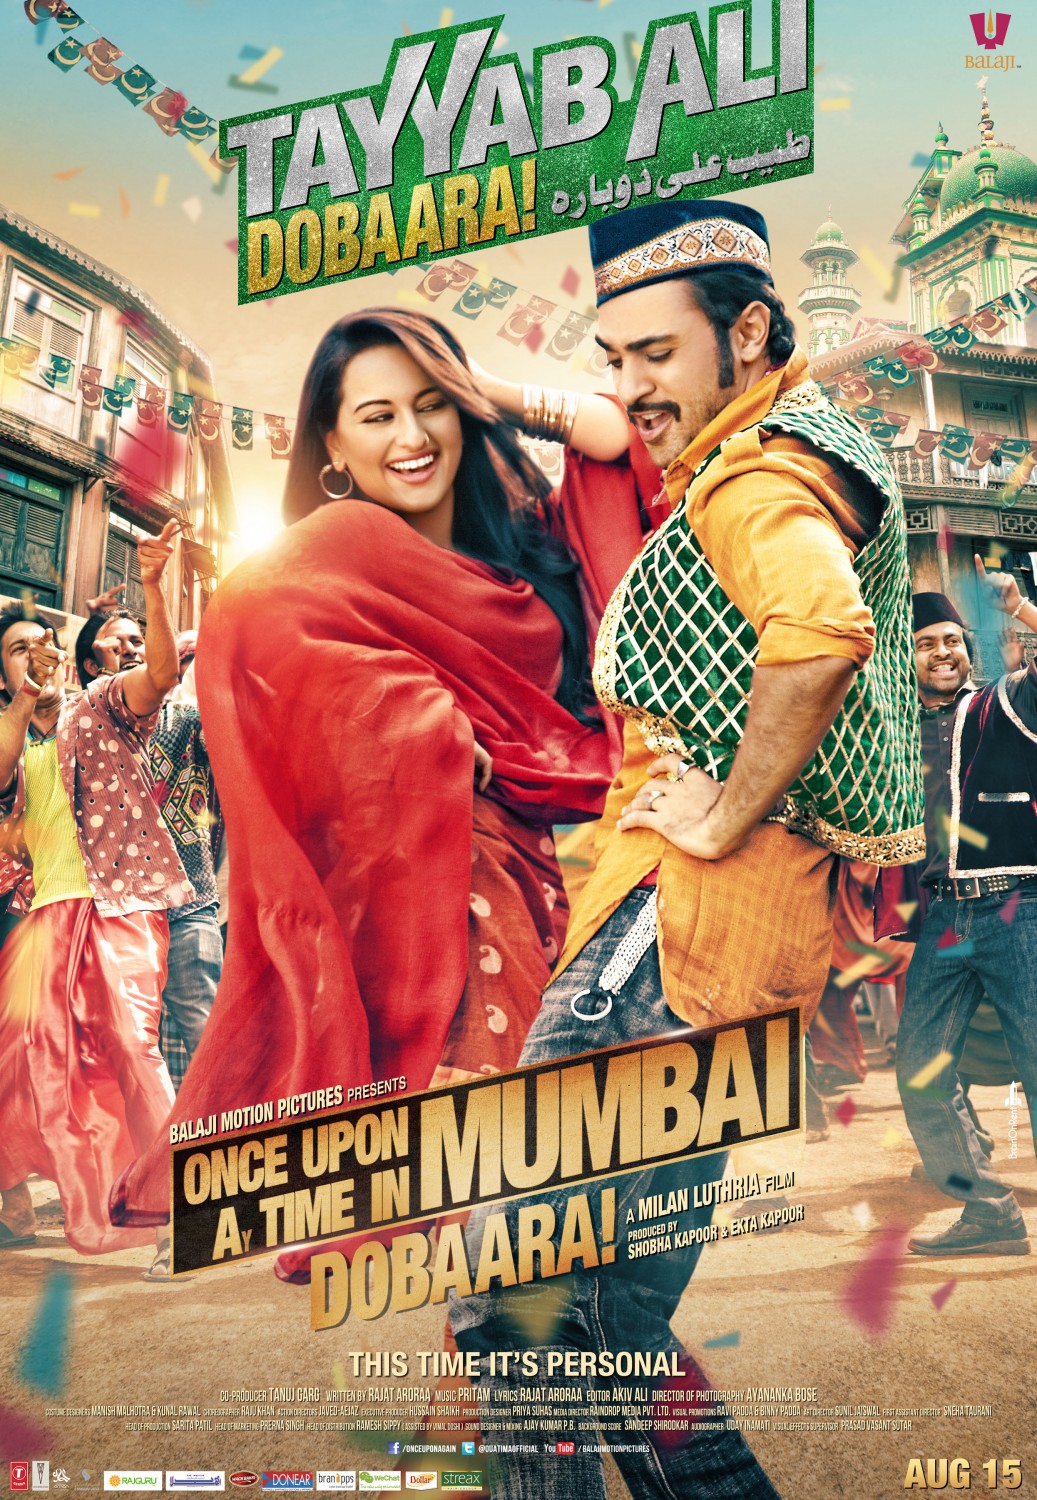 Extra Large Movie Poster Image for Once Upon a Time in Mumbai Dobaara! (#11 of 11)